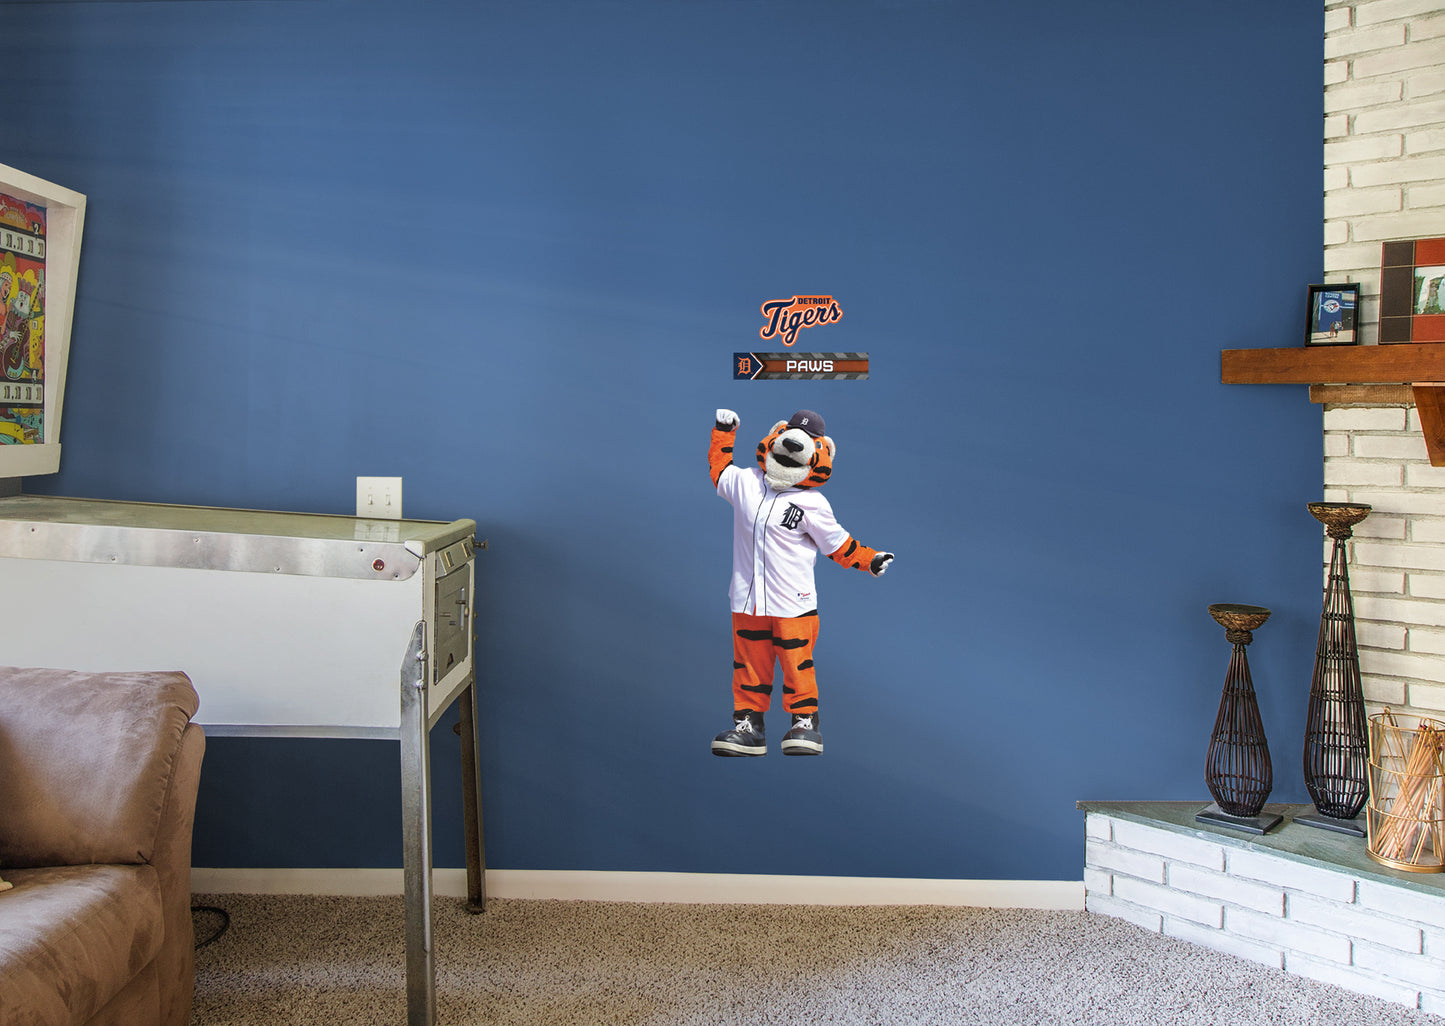 Detroit Tigers: Paws  Mascot        - Officially Licensed MLB Removable Wall   Adhesive Decal